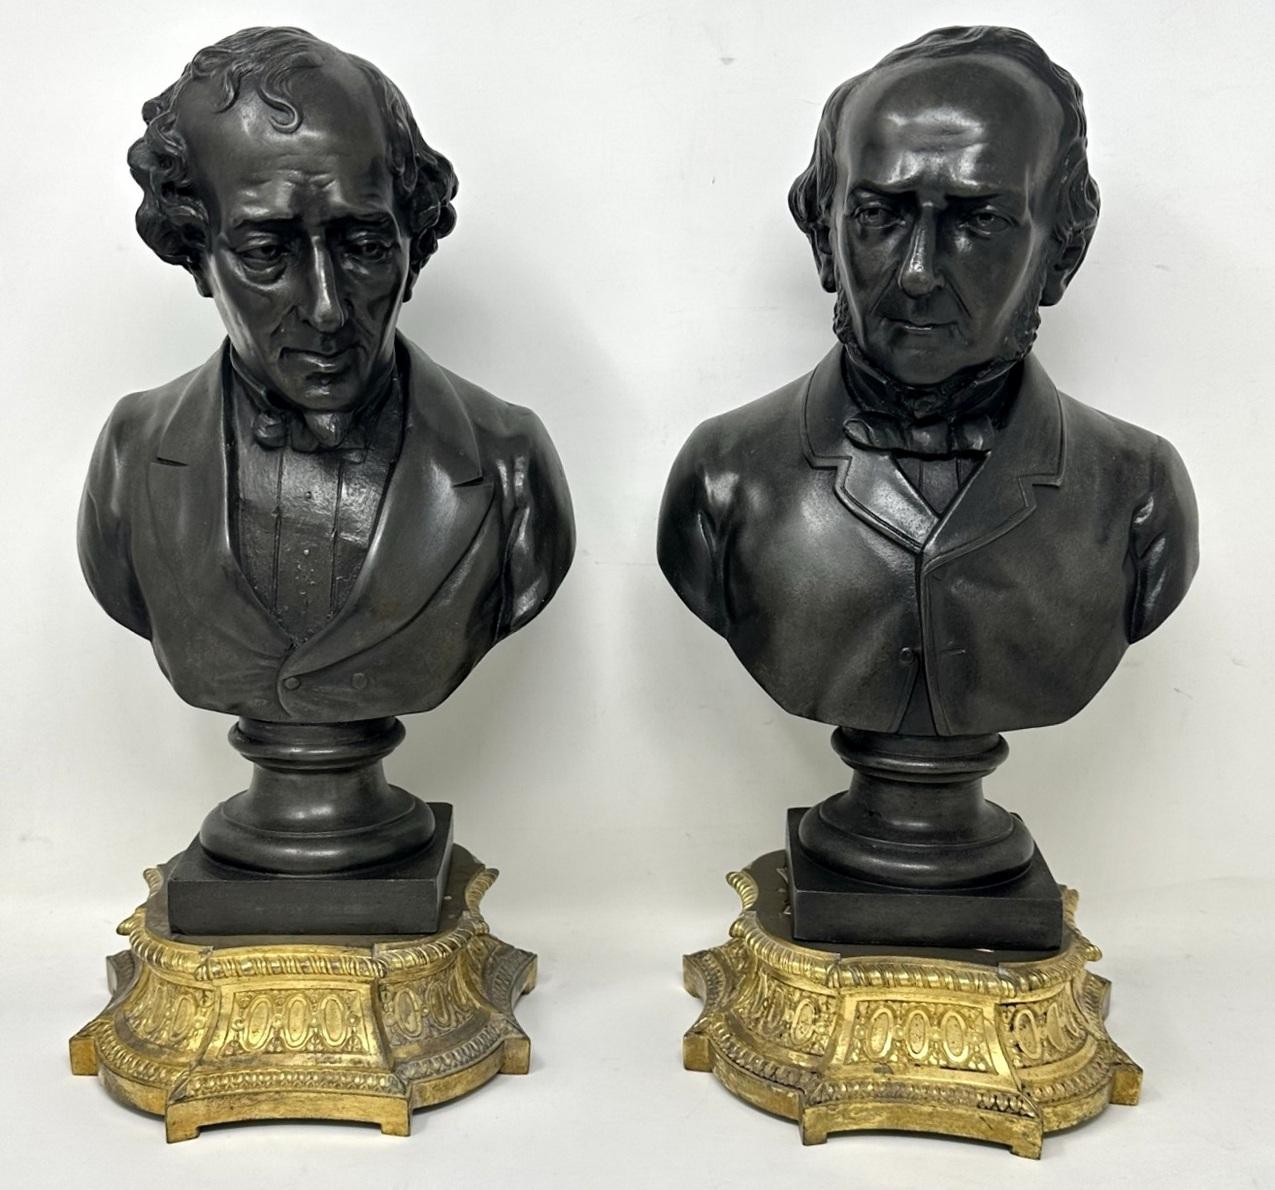 Stunning Pair of English Patinated Bronzed Metal Library Busts made in Birmingham by Wright and Fletcher Foundry, dated 1878 offered with associated heavy gauge ornately cast Ormolu Bronze bases of similar period, possibly of French origin.